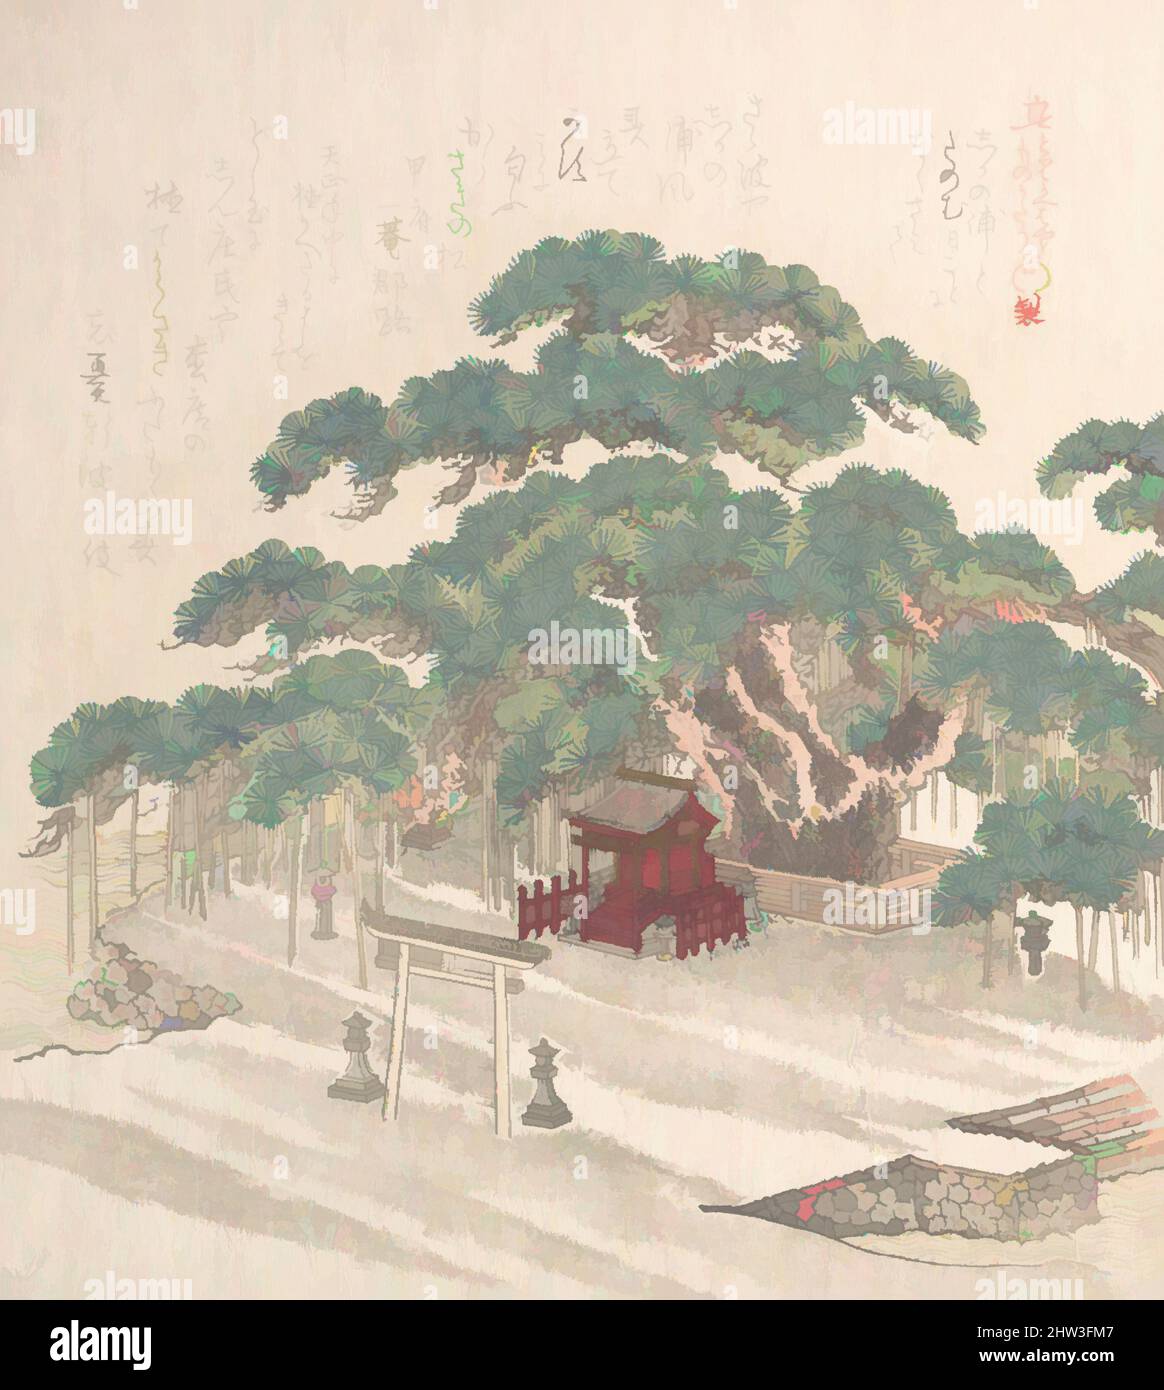 Art inspired by Shrine Under a Big Pine Tree, Edo period (1615–1868), 19th century, Japan, Polychrome woodblock print (surimono); ink and color on paper, 8 x 7 1/4 in. (20.3 x 18.4 cm), Prints, Kubo Shunman (Japanese, 1757–1820, Classic works modernized by Artotop with a splash of modernity. Shapes, color and value, eye-catching visual impact on art. Emotions through freedom of artworks in a contemporary way. A timeless message pursuing a wildly creative new direction. Artists turning to the digital medium and creating the Artotop NFT Stock Photo